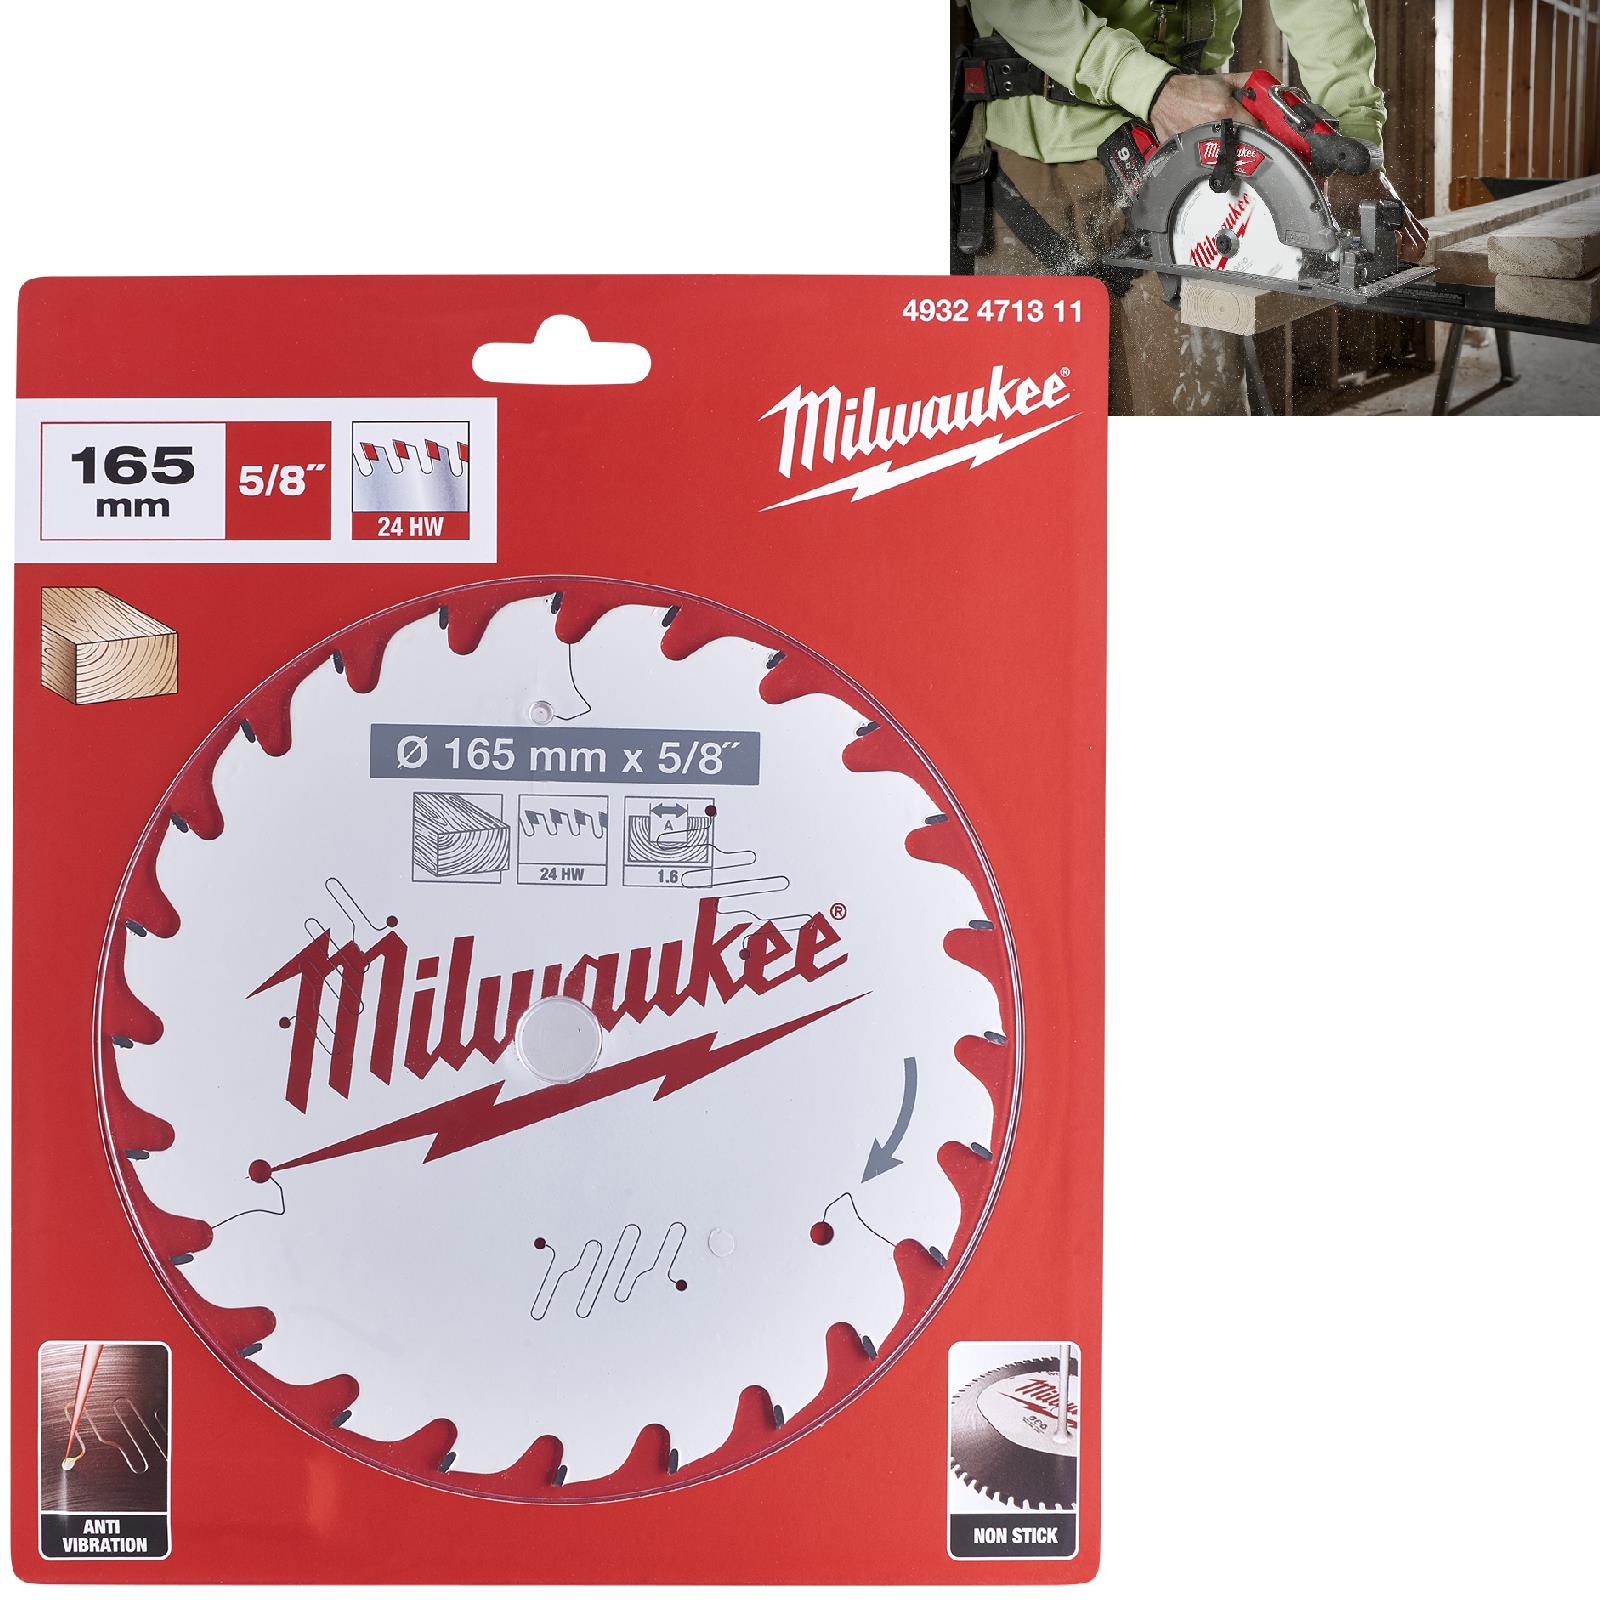 Milwaukee Circular Saw Blade for Wood 165mm x 5/8" Bore x 1.6mm Width 24T ATB